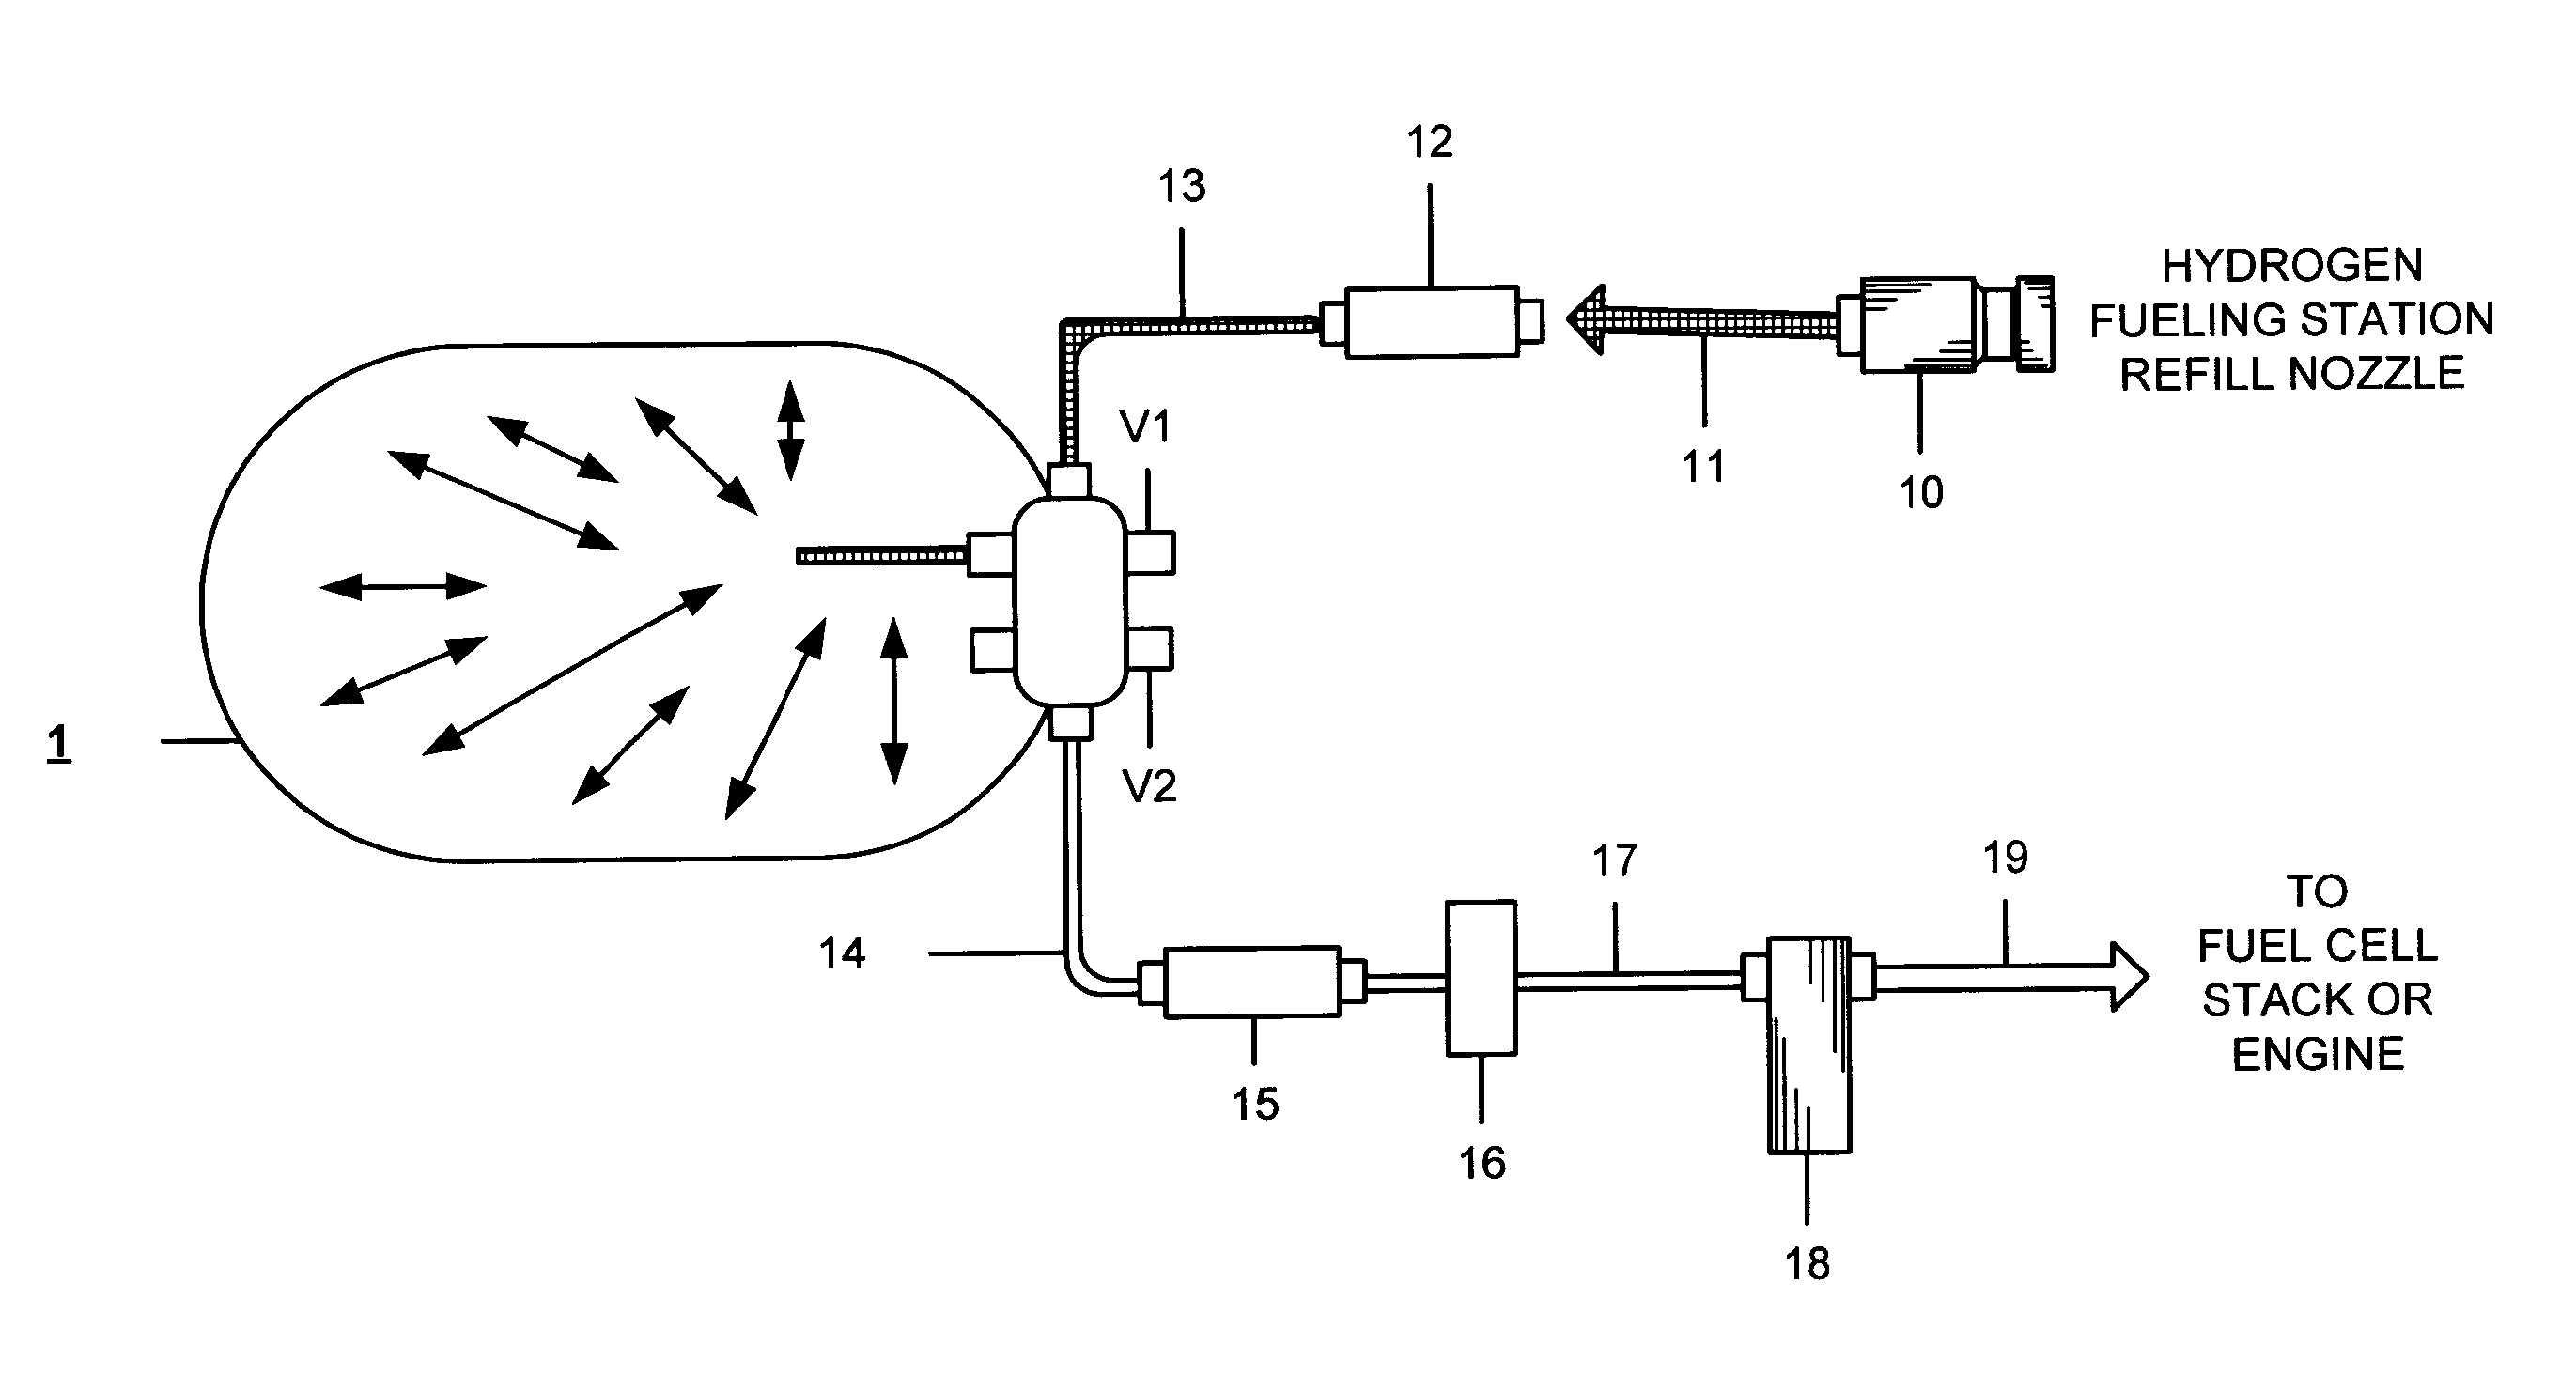 Pressure Powered Cooling System for Enhancing the Refill Speed and Capacity of On Board High Pressure Vehicle Gas Storage Tanks